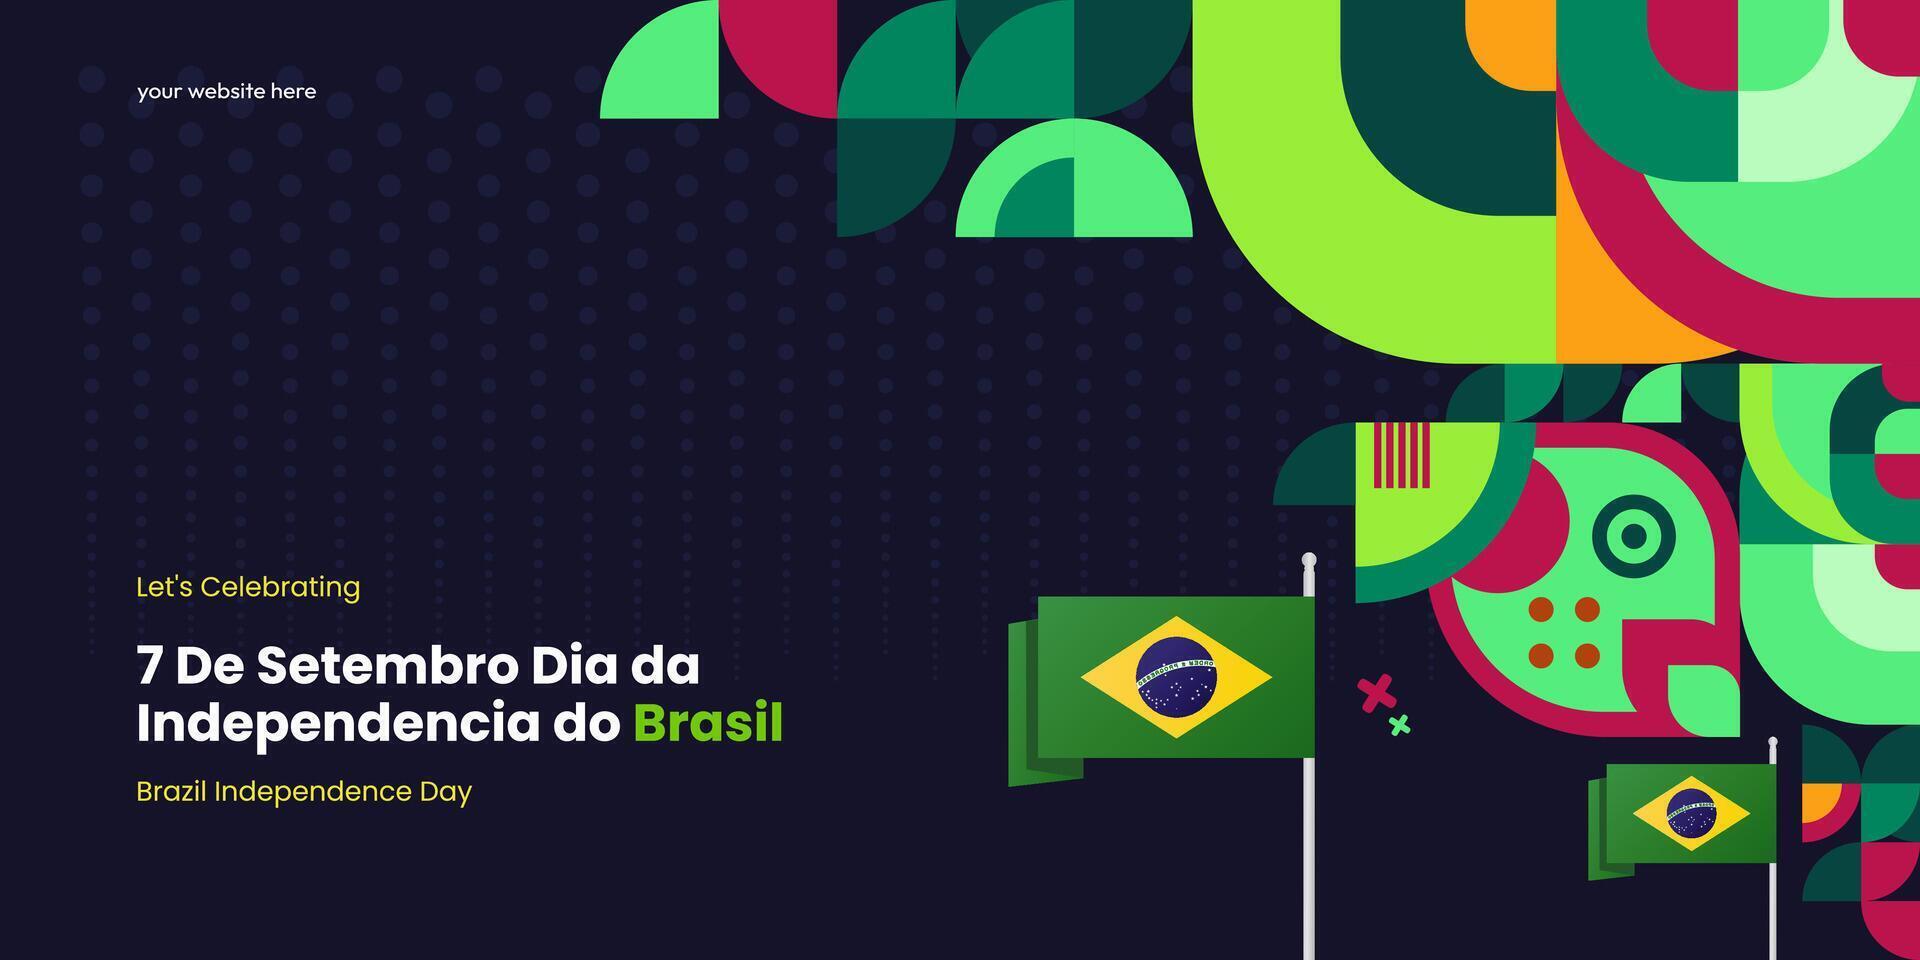 Brazil Independence Day banner in colorful modern geometric style. National Independence Day greeting card cover with typography. Vector illustration for national holiday celebration party